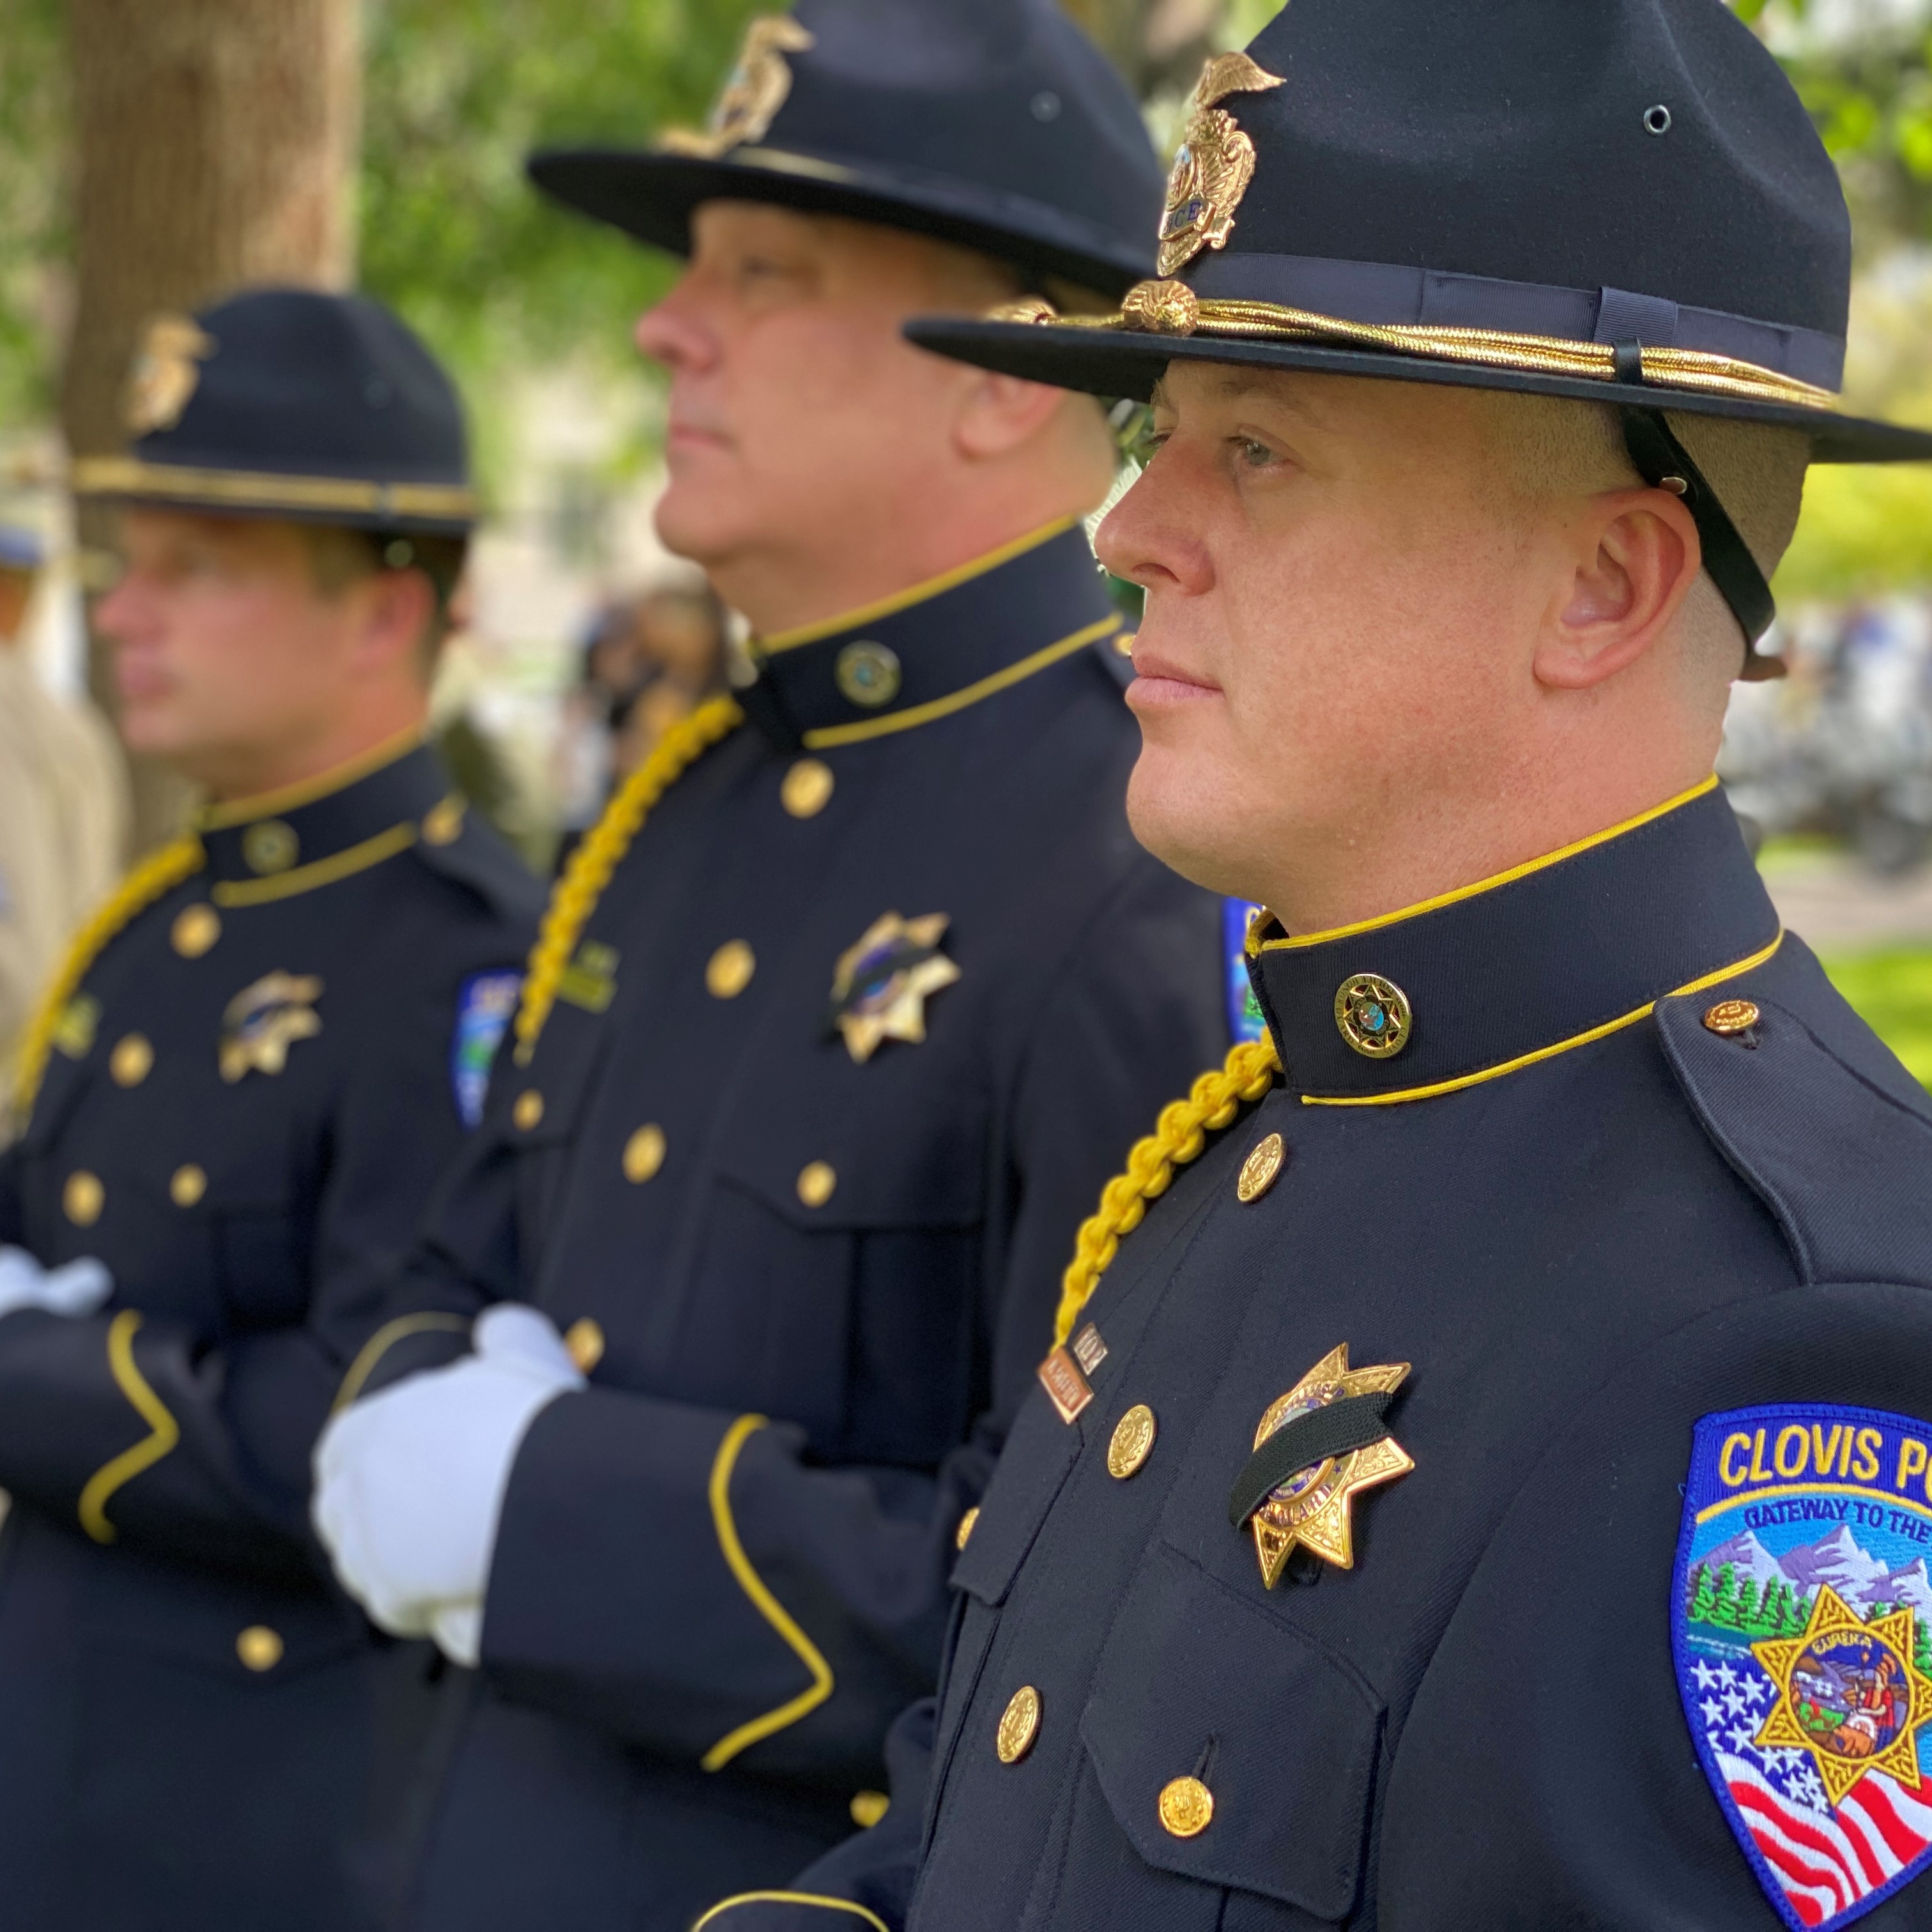 Honor Guard officers at ceremonial event